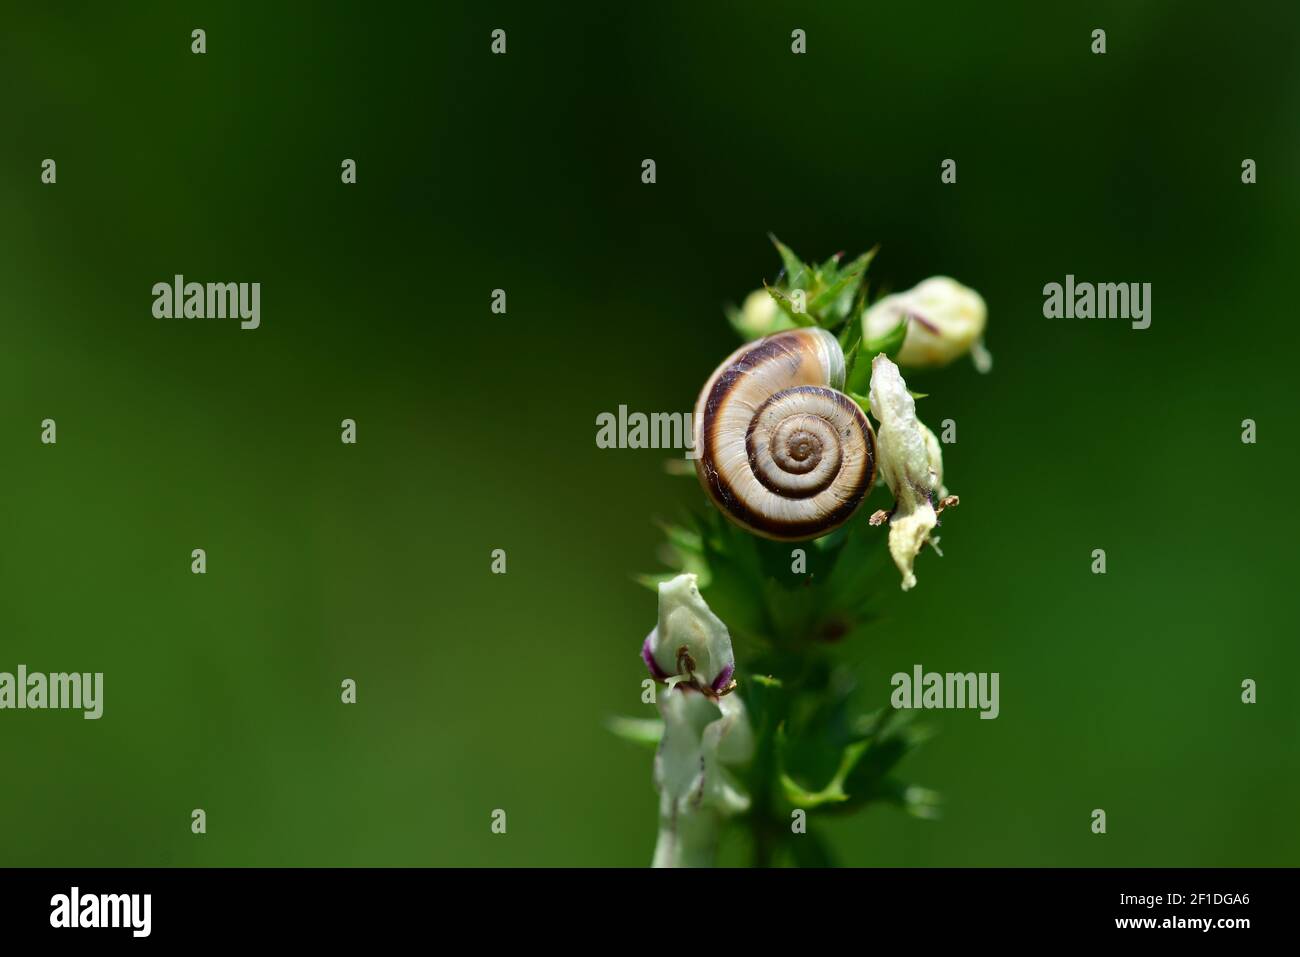 Close-up view of a snail shell attached to the top of a flowering plant. Green background changing from light to dark shades of green. White flowers w Stock Photo